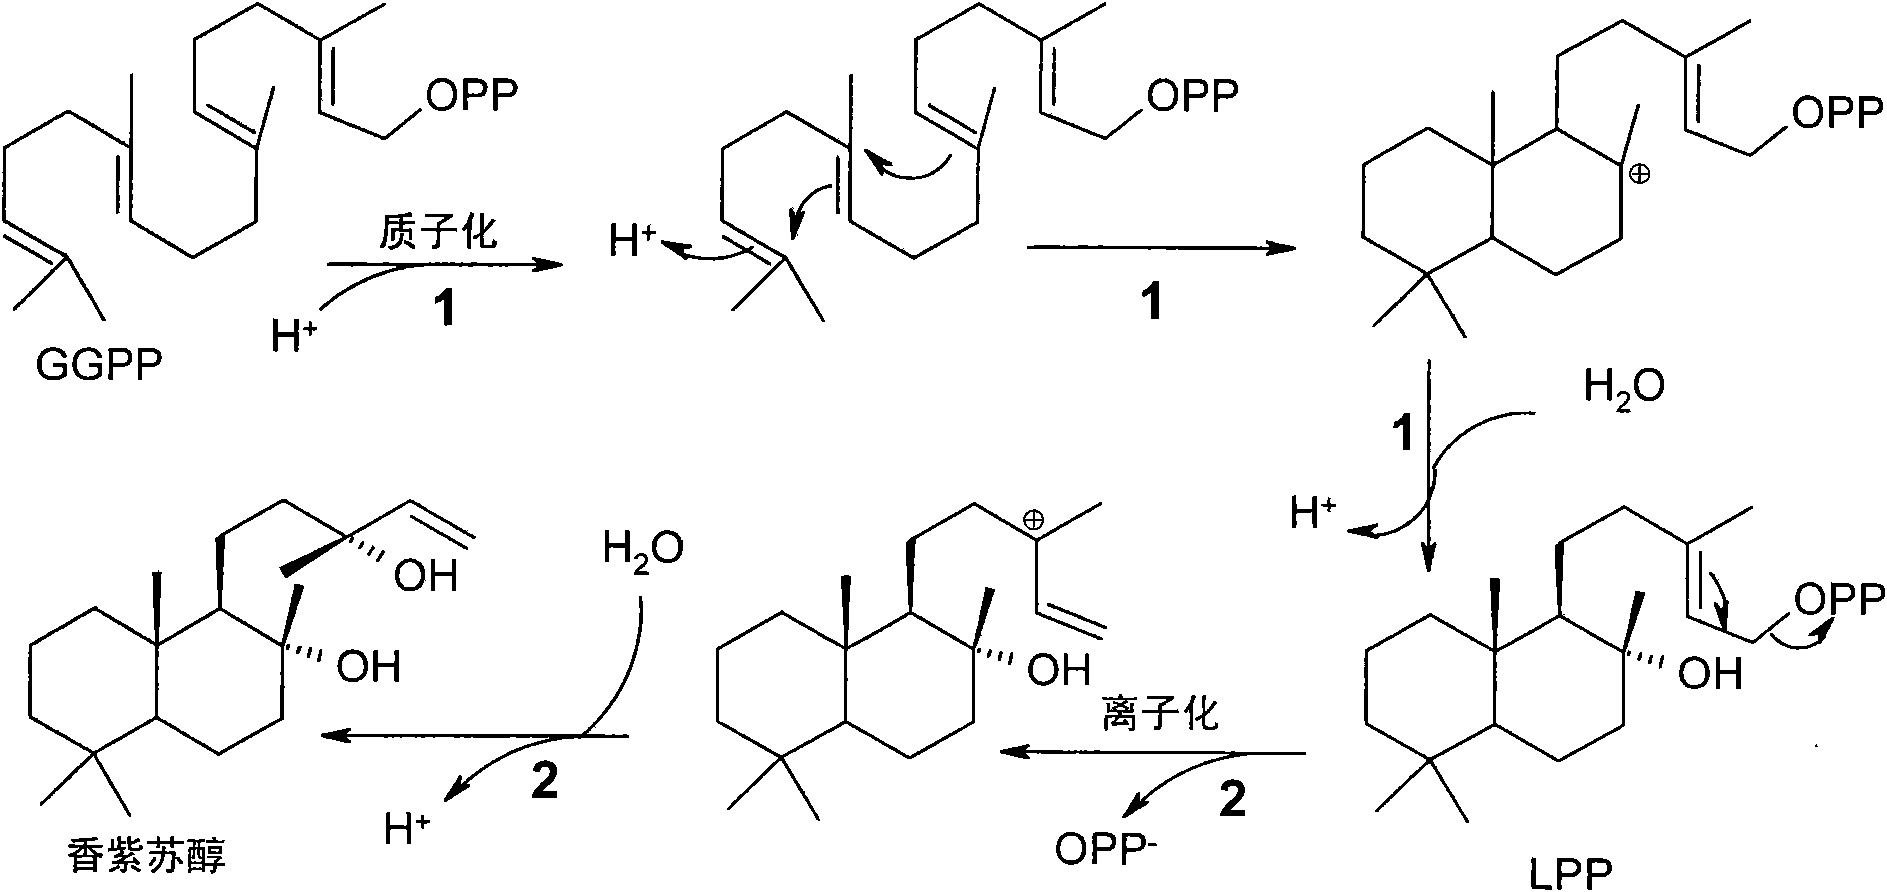 Method for producing sclareol